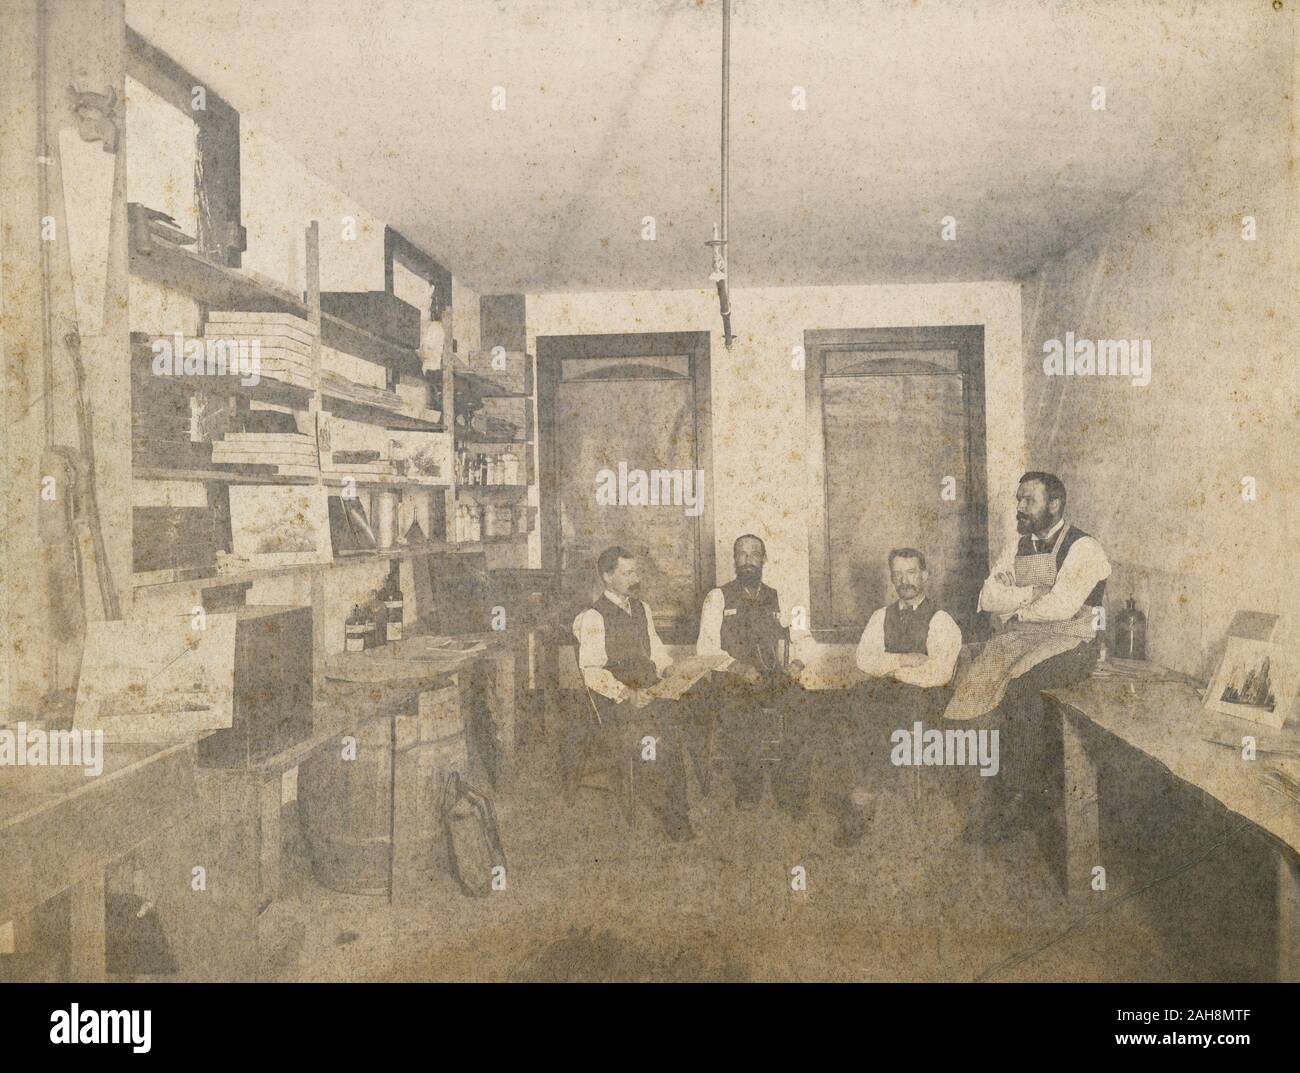 Antique c1890 photograph, photographers in a storage room with paper and bottles of chemicals on the shelves in Binghamton, New York. SOURCE: ORIGINAL PHOTOGRAPH Stock Photo